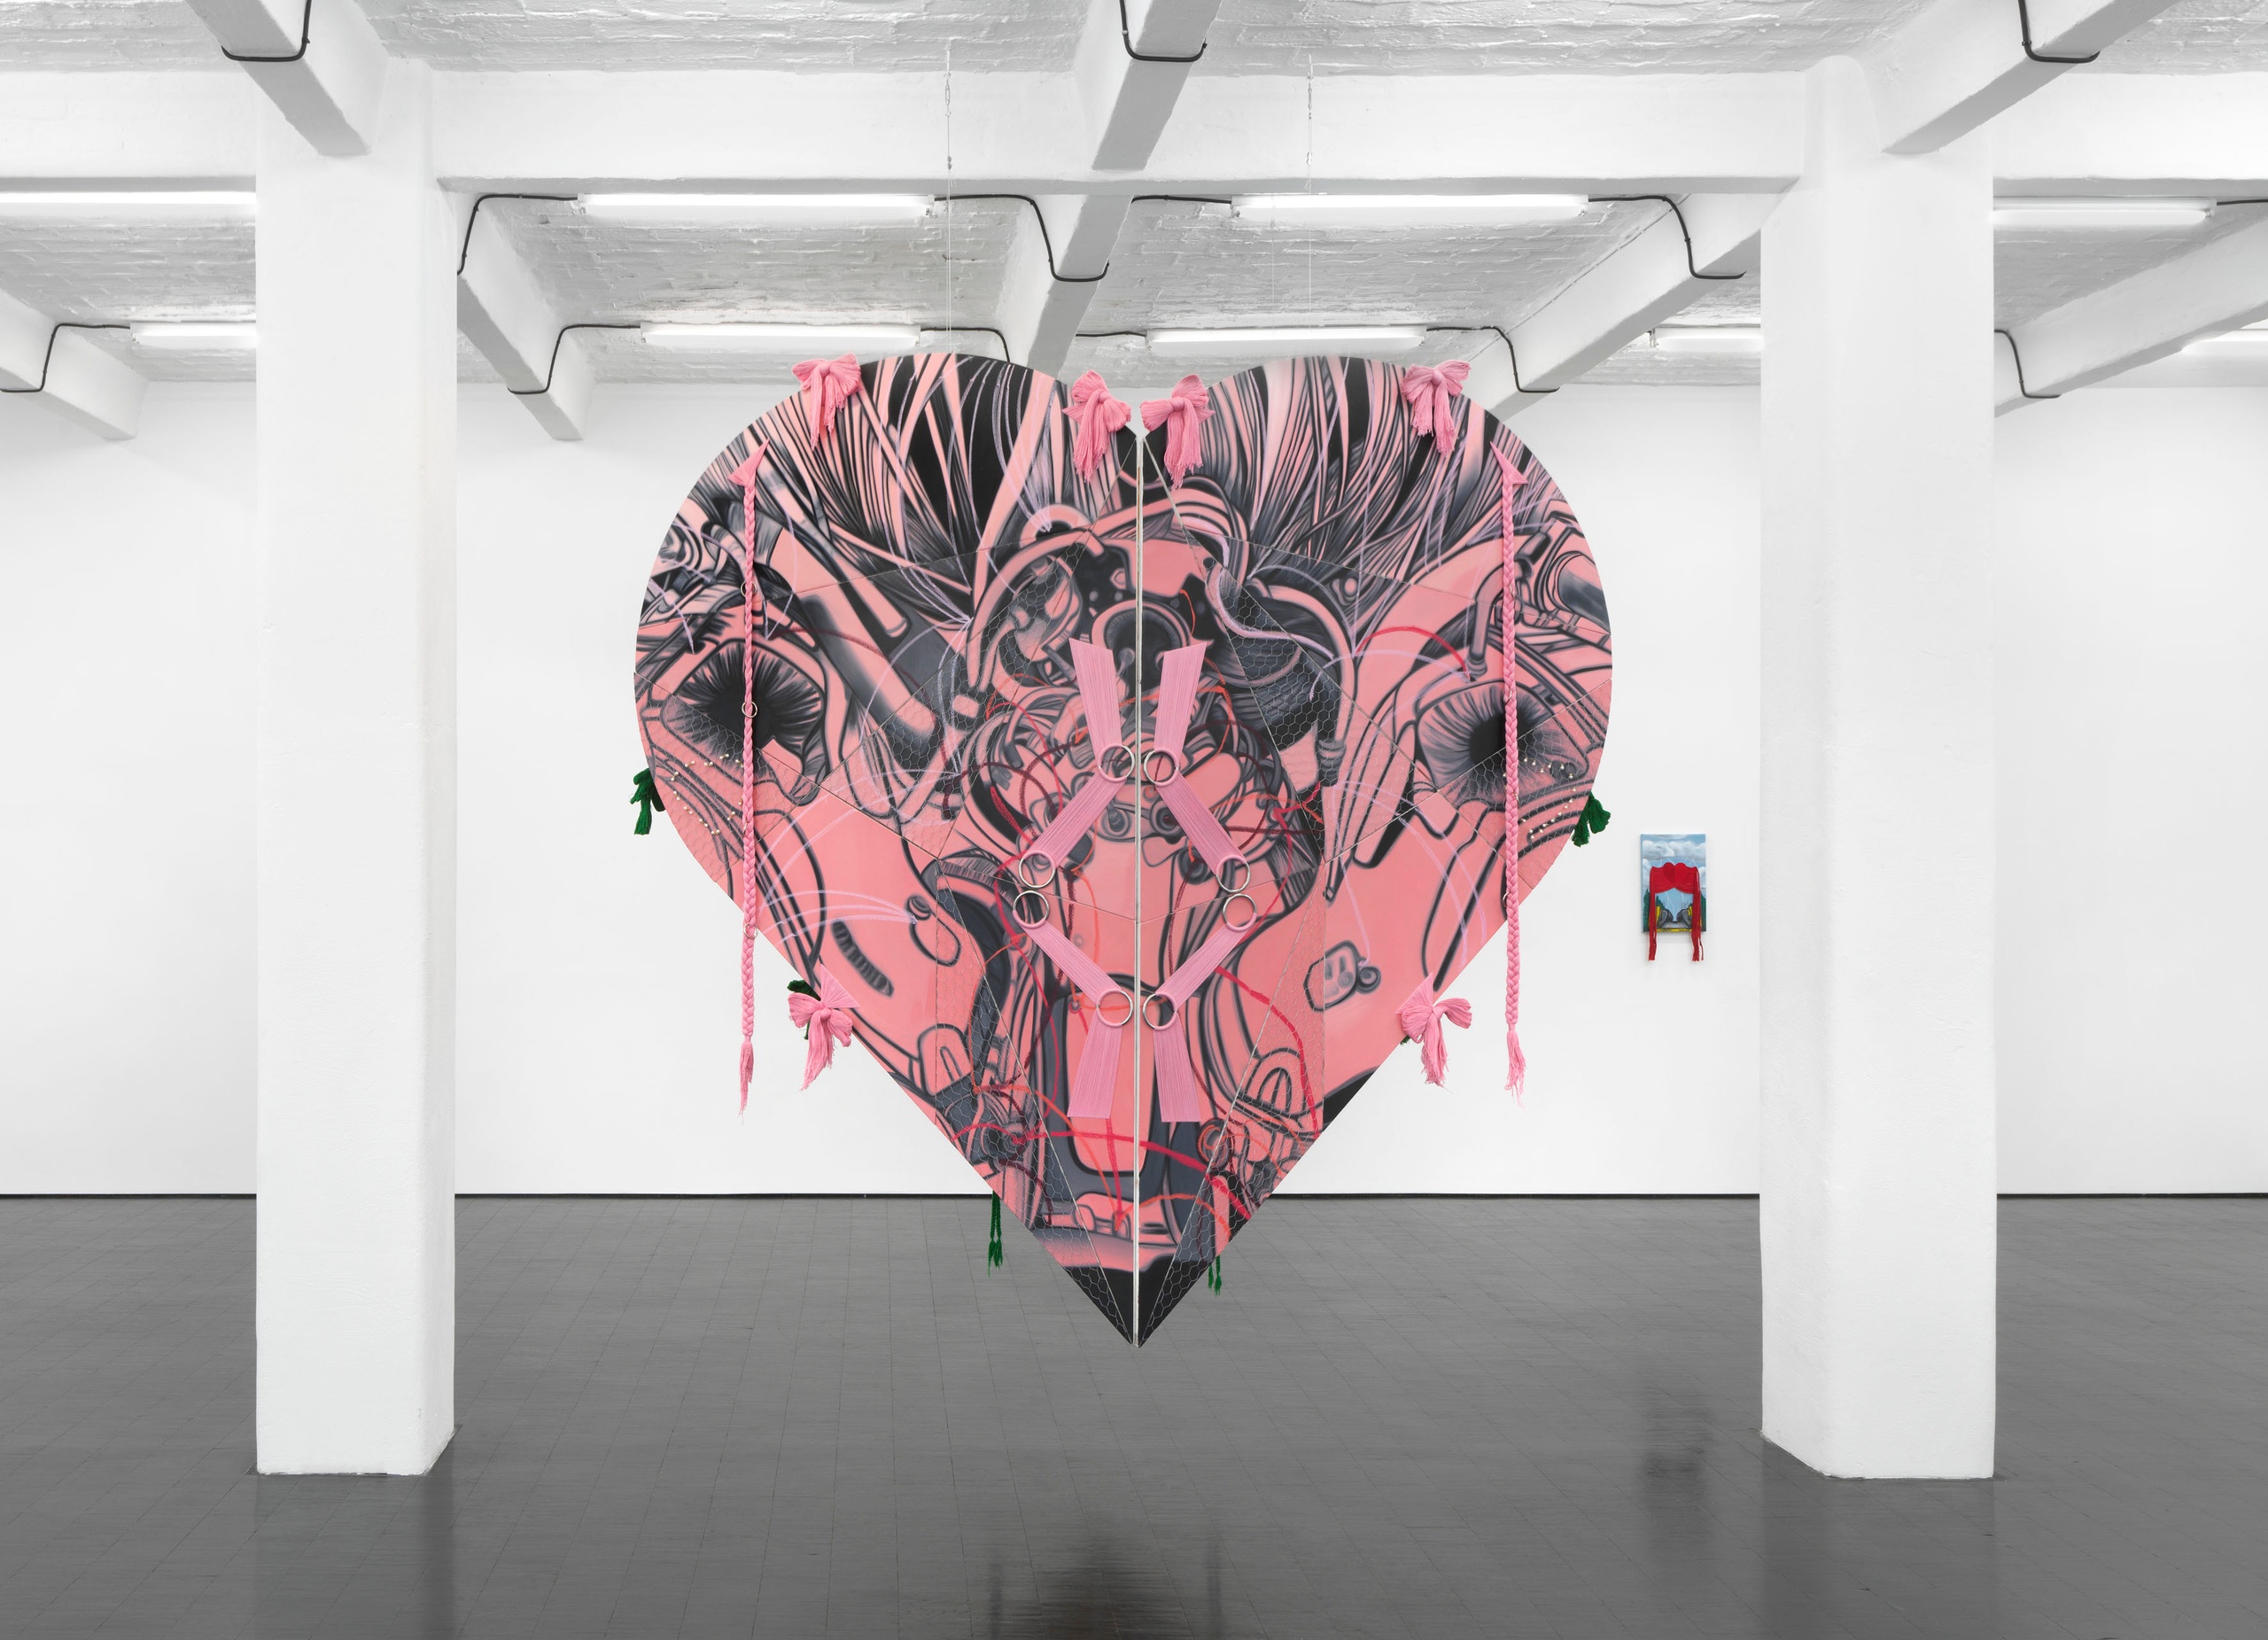 Frieda Toranzo JaegerOpen your heart because everything will change, 2023oil on canvas, embroidery, hardware; 32 parts275 x 285 x 75 cm | 108 1⁄4 x 112 1⁄4 x 29 1⁄2 in